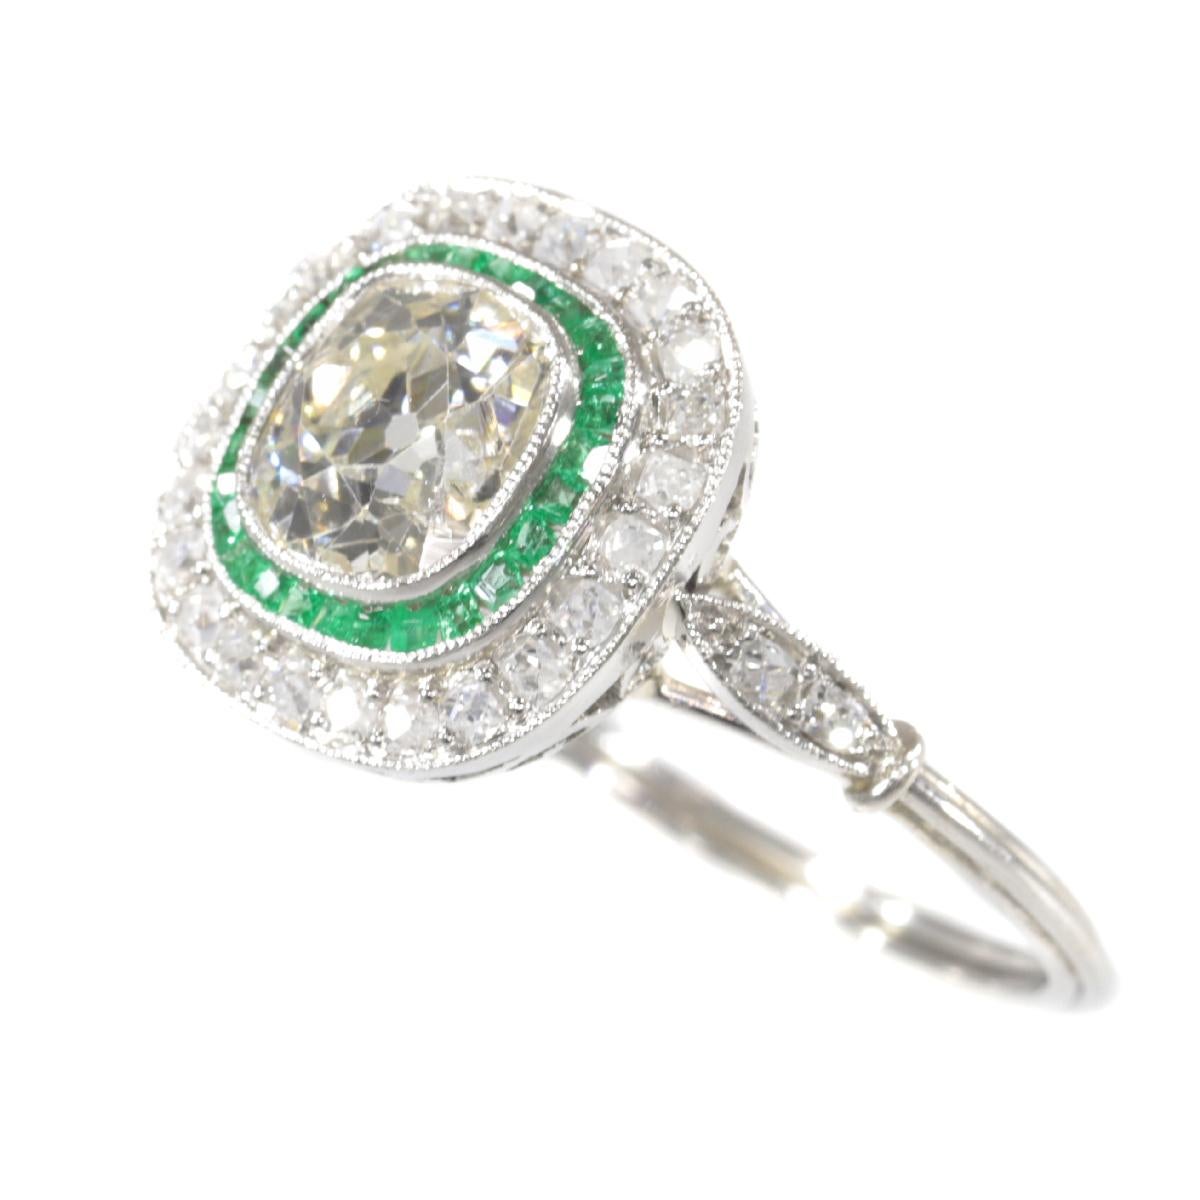 Women's Vintage Art Deco Style Platinum Diamond and Emerald Engagement Ring, 1930s For Sale